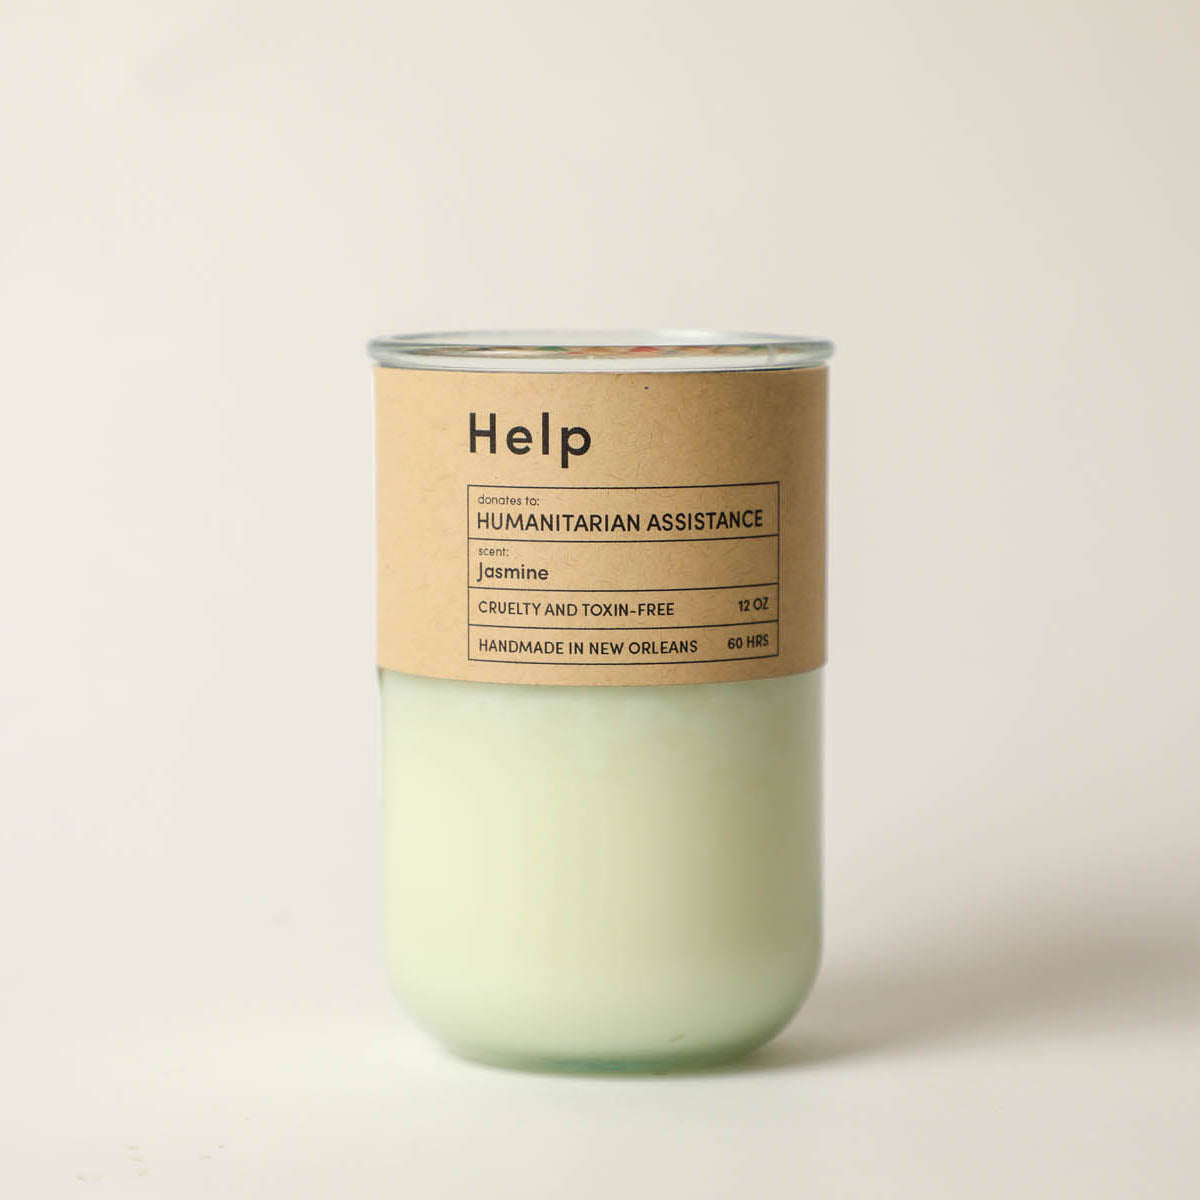 Help - Humanitarian Assistance / Jasmine Scent: Candles for Good